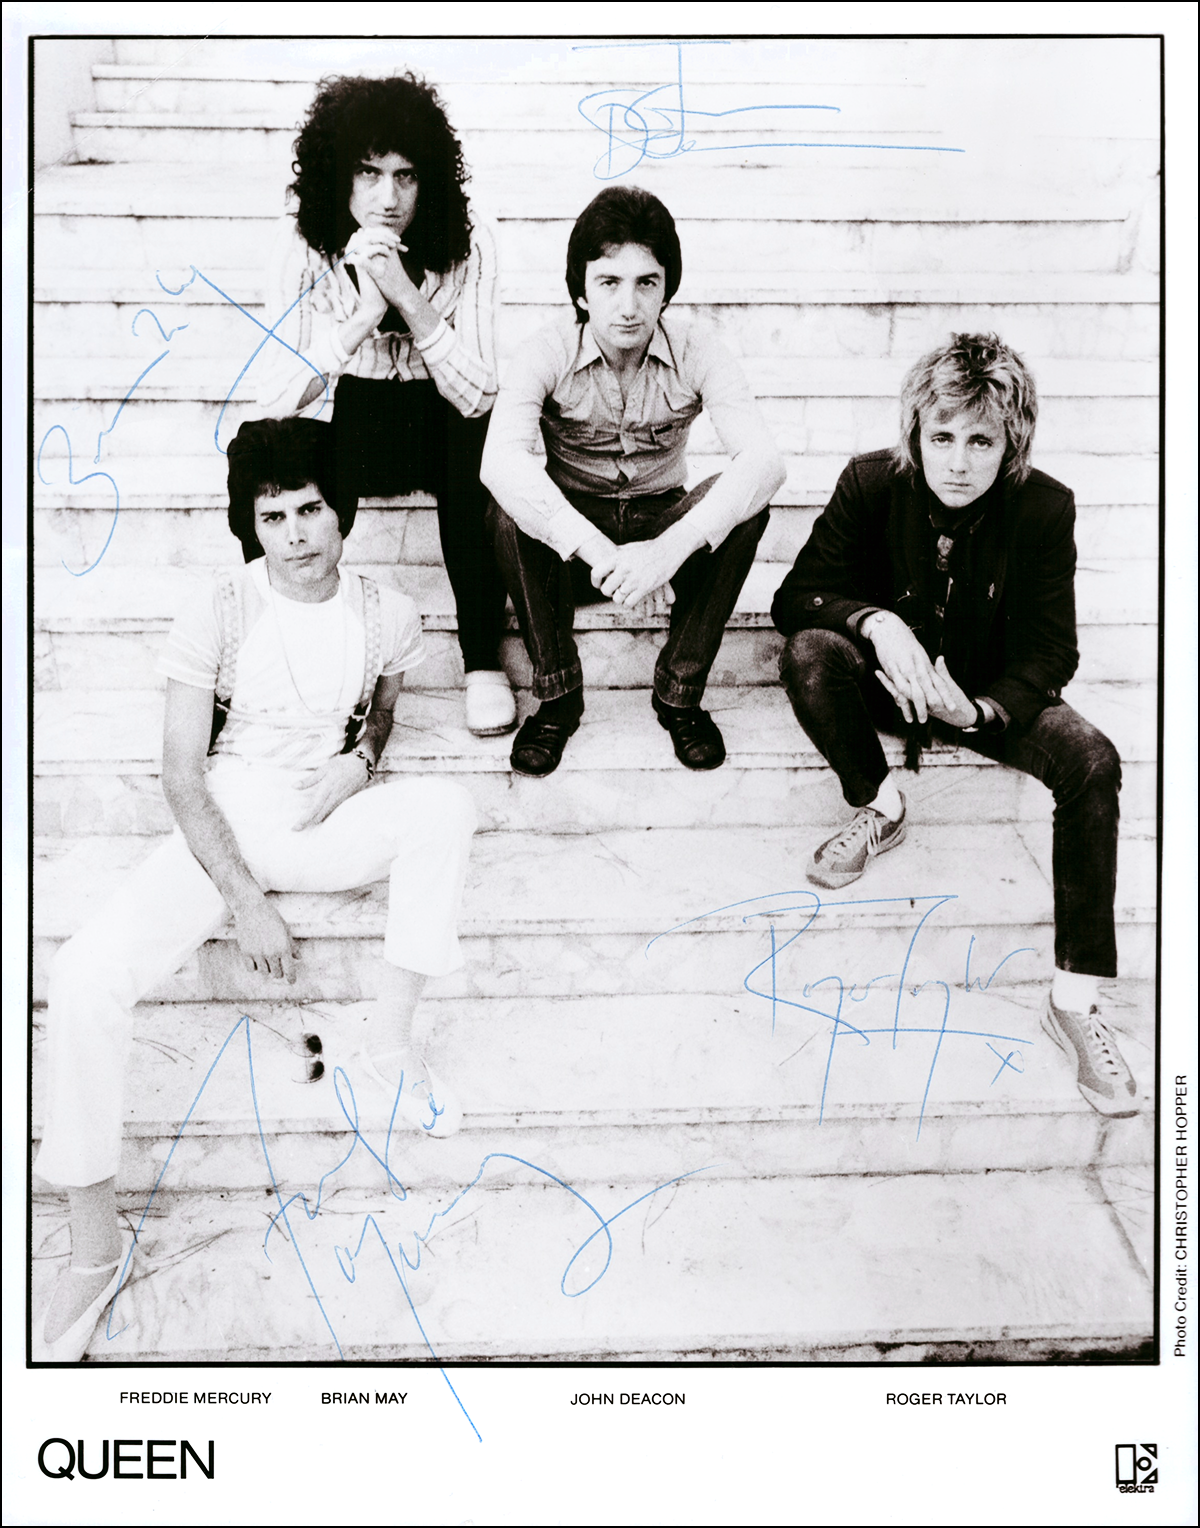 QUEEN BAND SIGNED AUTOGRAPH 6x9 RP PHOTO BRIAN MAY DEACON TAYLOR FREDDIE MERCURY 